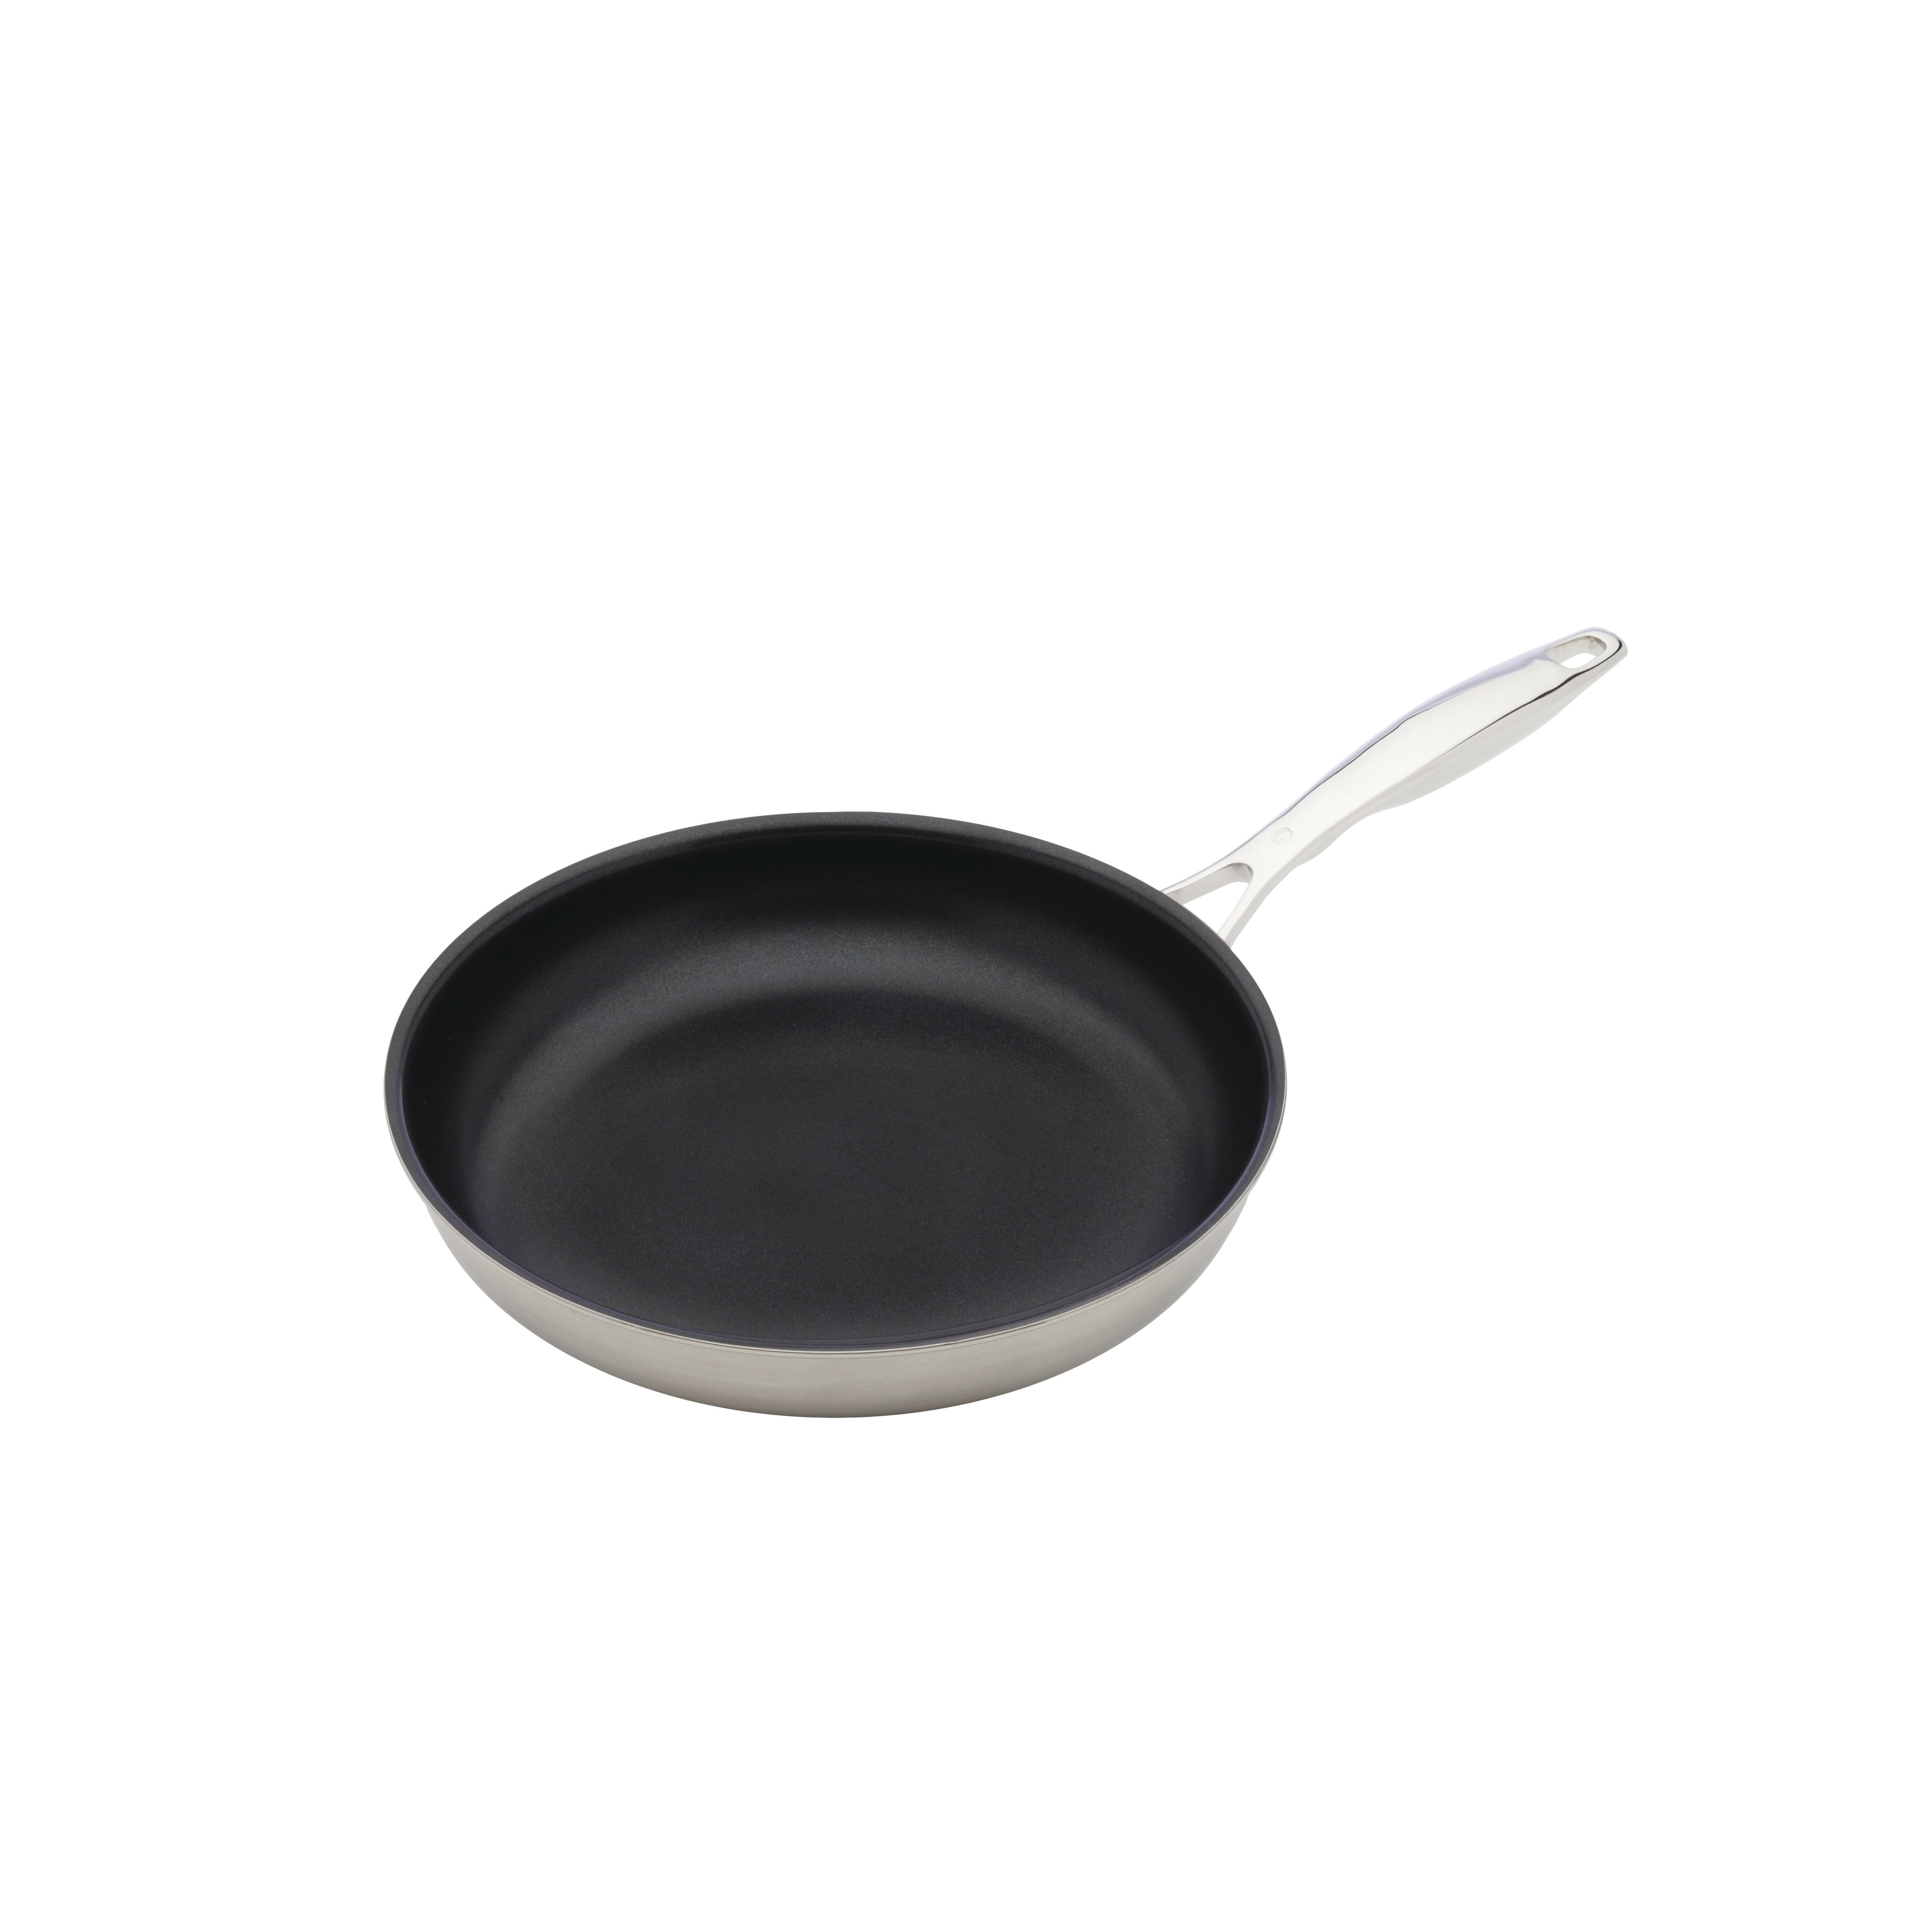 https://ak1.ostkcdn.com/images/products/is/images/direct/b8bb4063fd3508fb6f0671d3bc3e7a9721fa422e/Nonstick-Clad-Fry-Pan-11%22.jpg